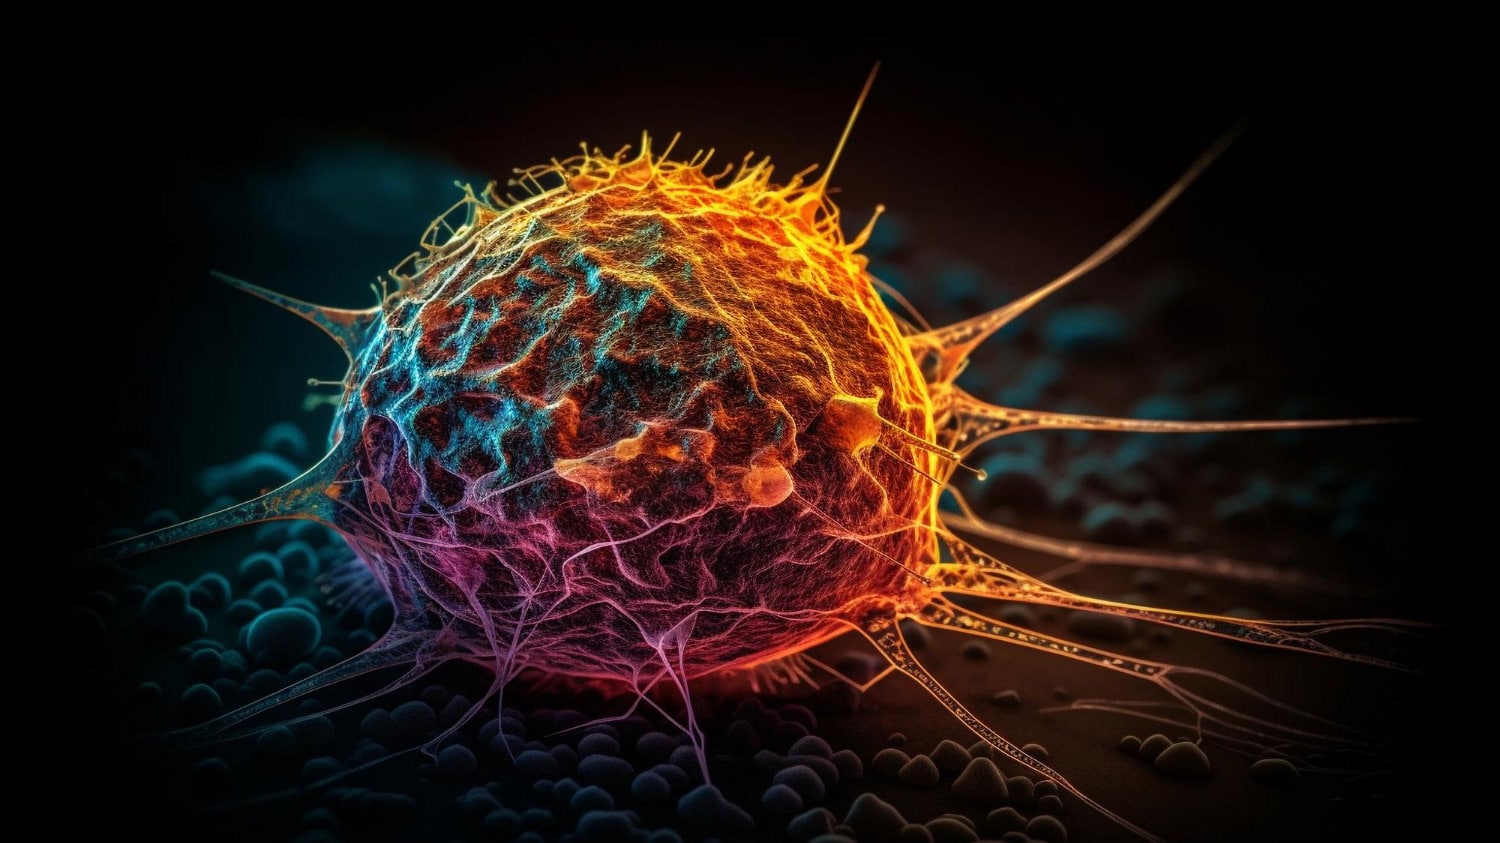 Cancer Cell Is On Top Of A Cell Background Hpv Pictures Background Image  And Wallpaper for Free Download